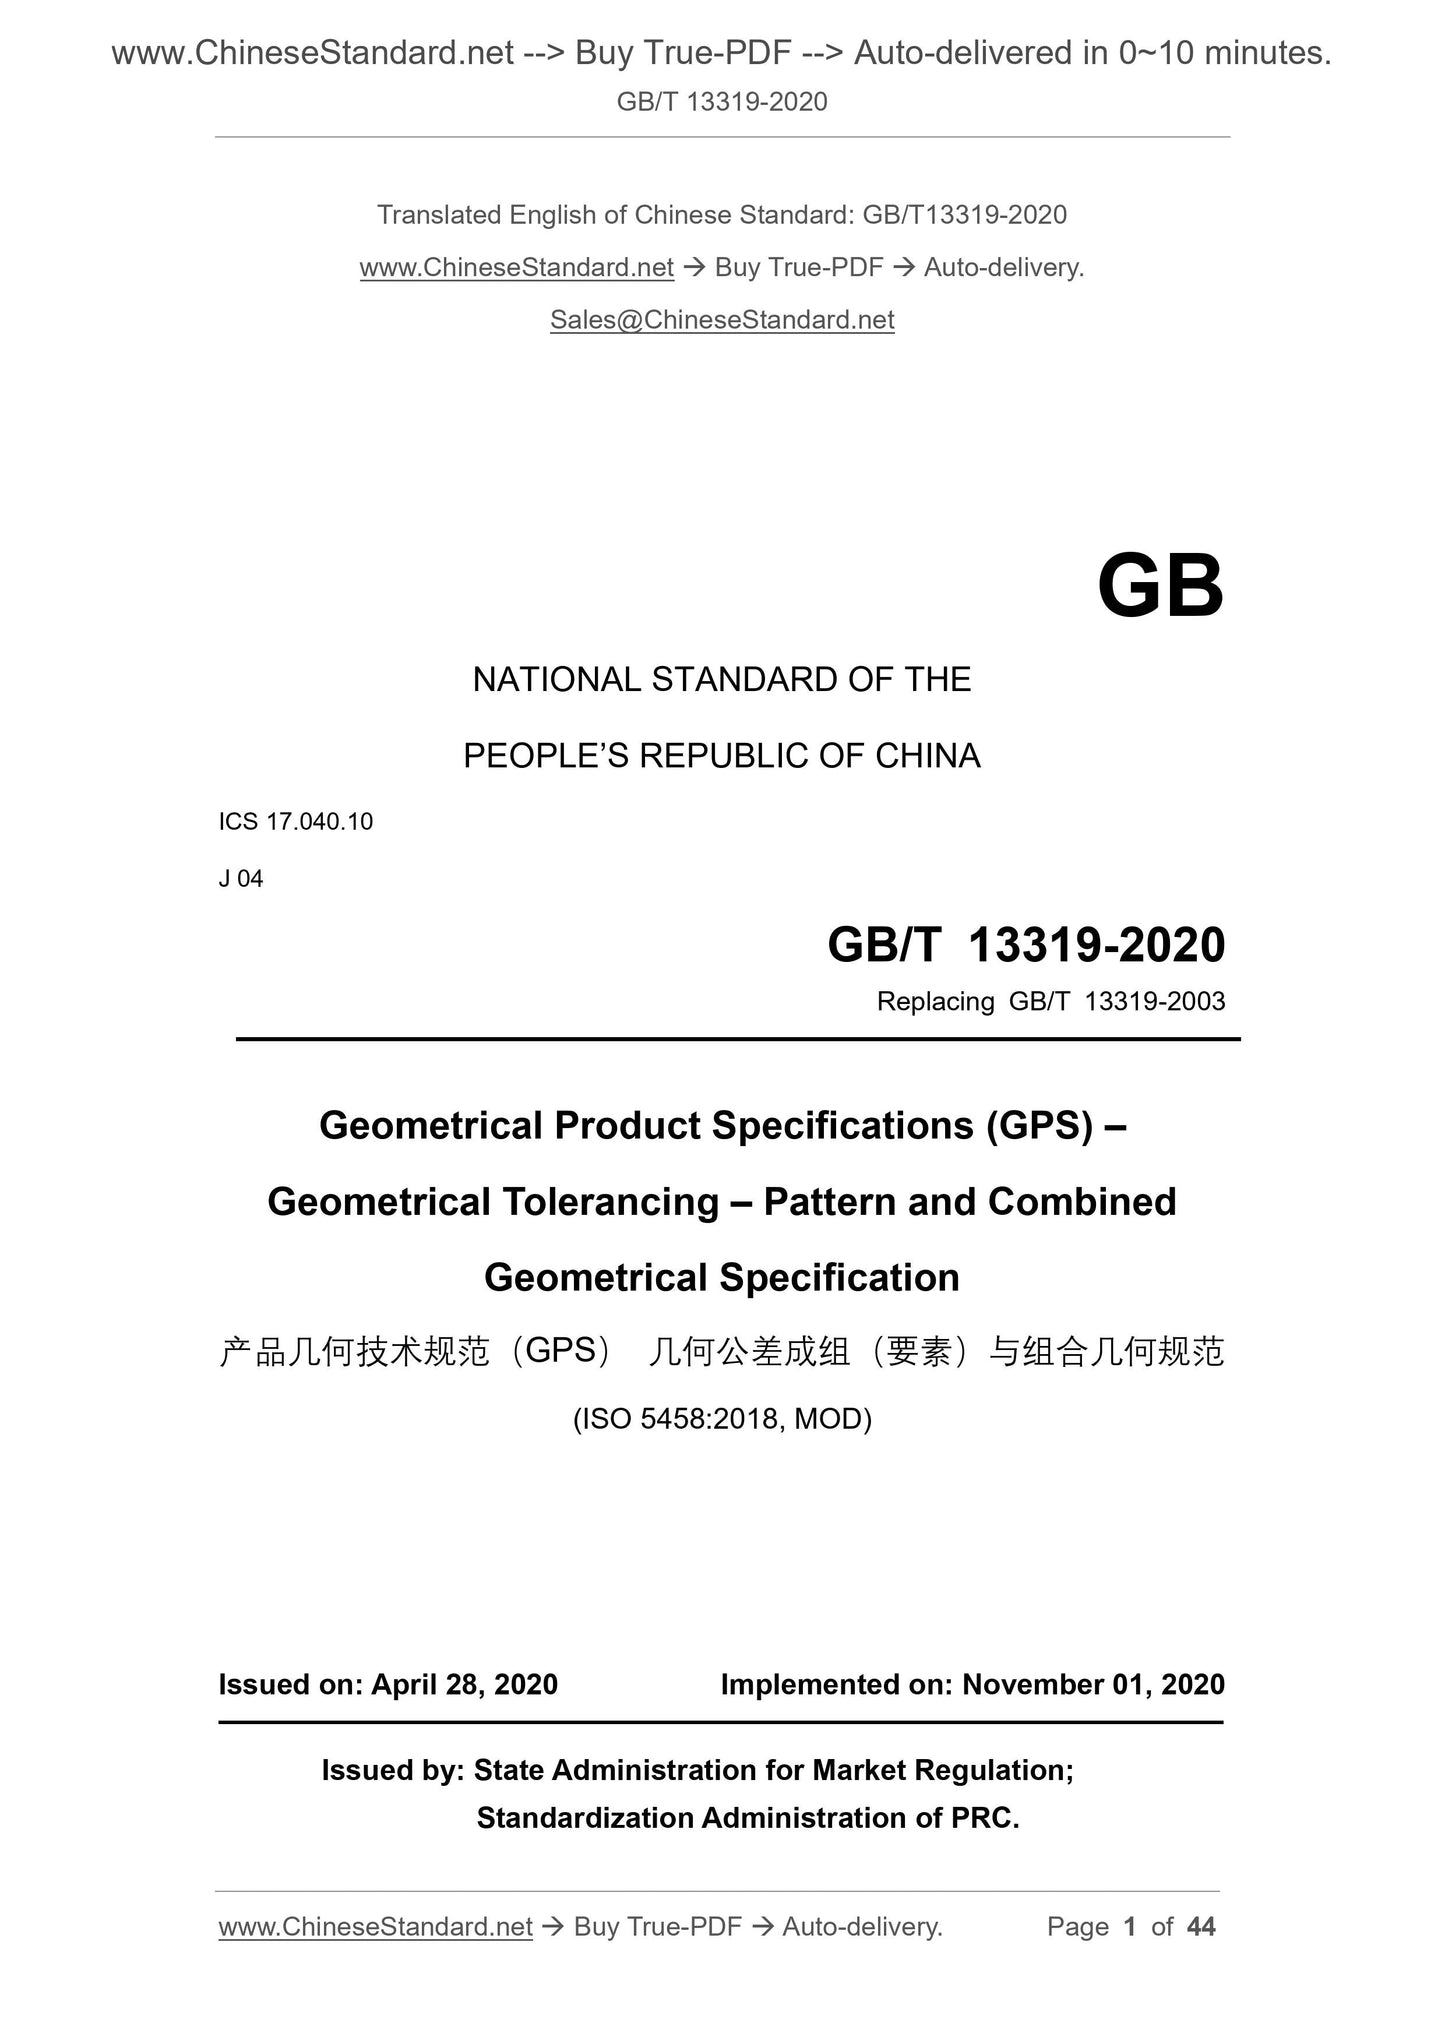 GB/T 13319-2020 Page 1